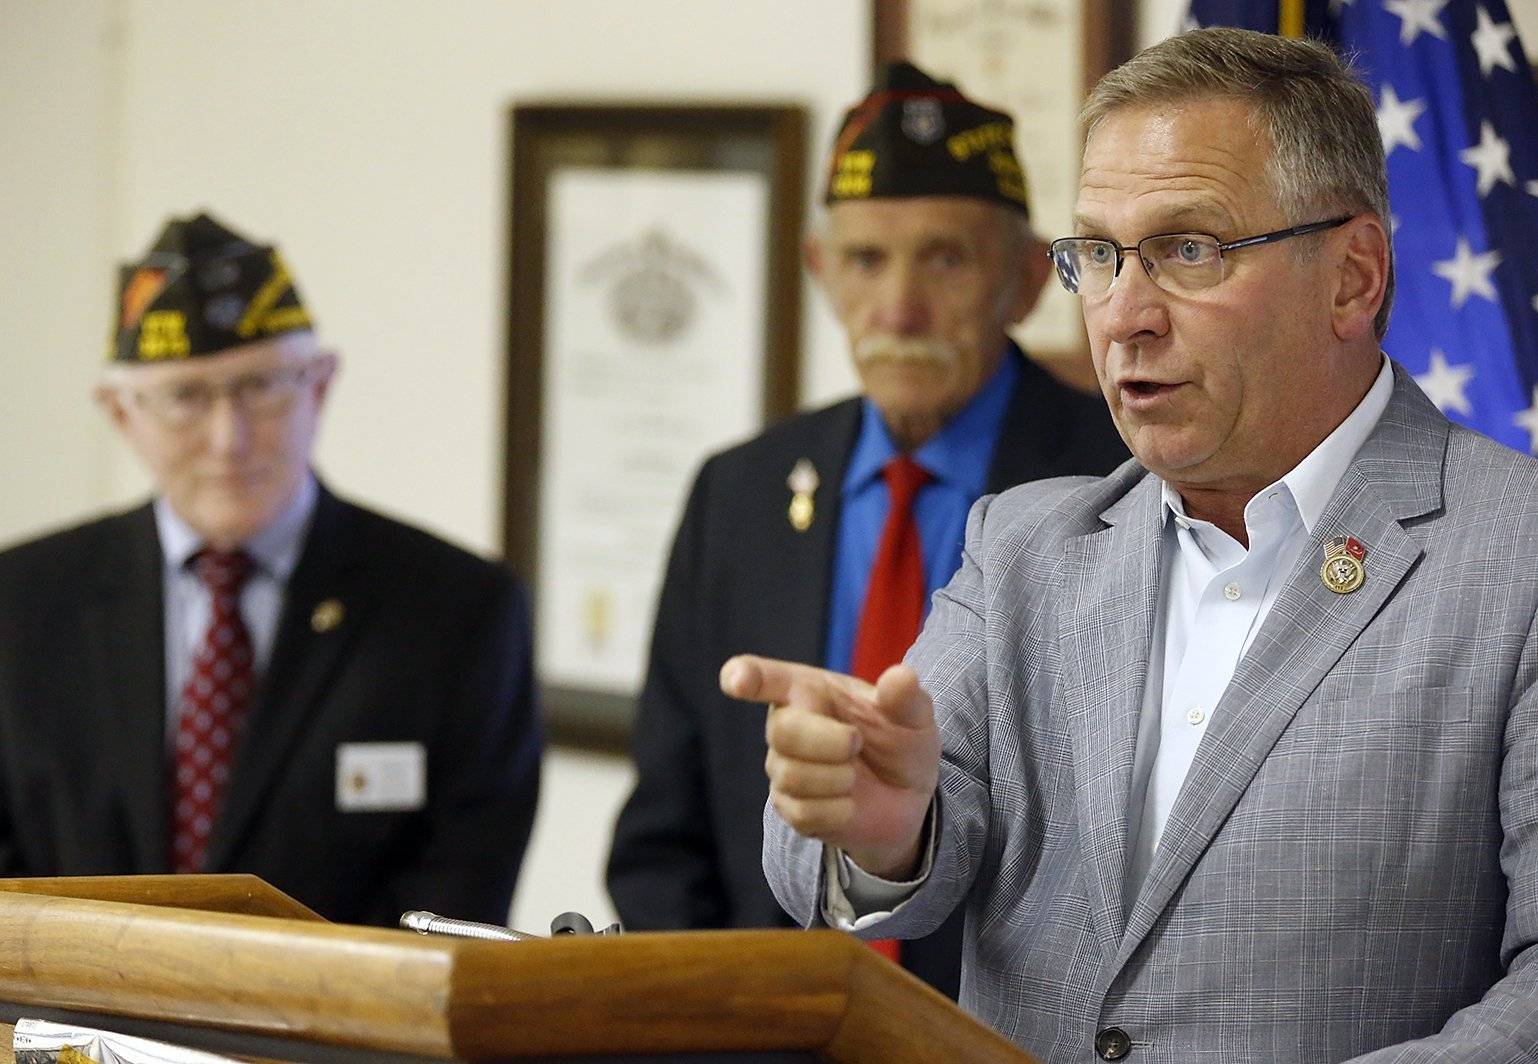 In this May 29, 2017 photo, Republican U.S. Rep. Mike Bost speaks to veterans at VFW Post  4183 in Belleville, Ill. Democrat Brendan Kelly is trying to retake a Southern Illinois House seat that Democrats held for more than 30 years before Bost won it in 2014. (Steve Nagy/Belleville News-Democrat, via AP)